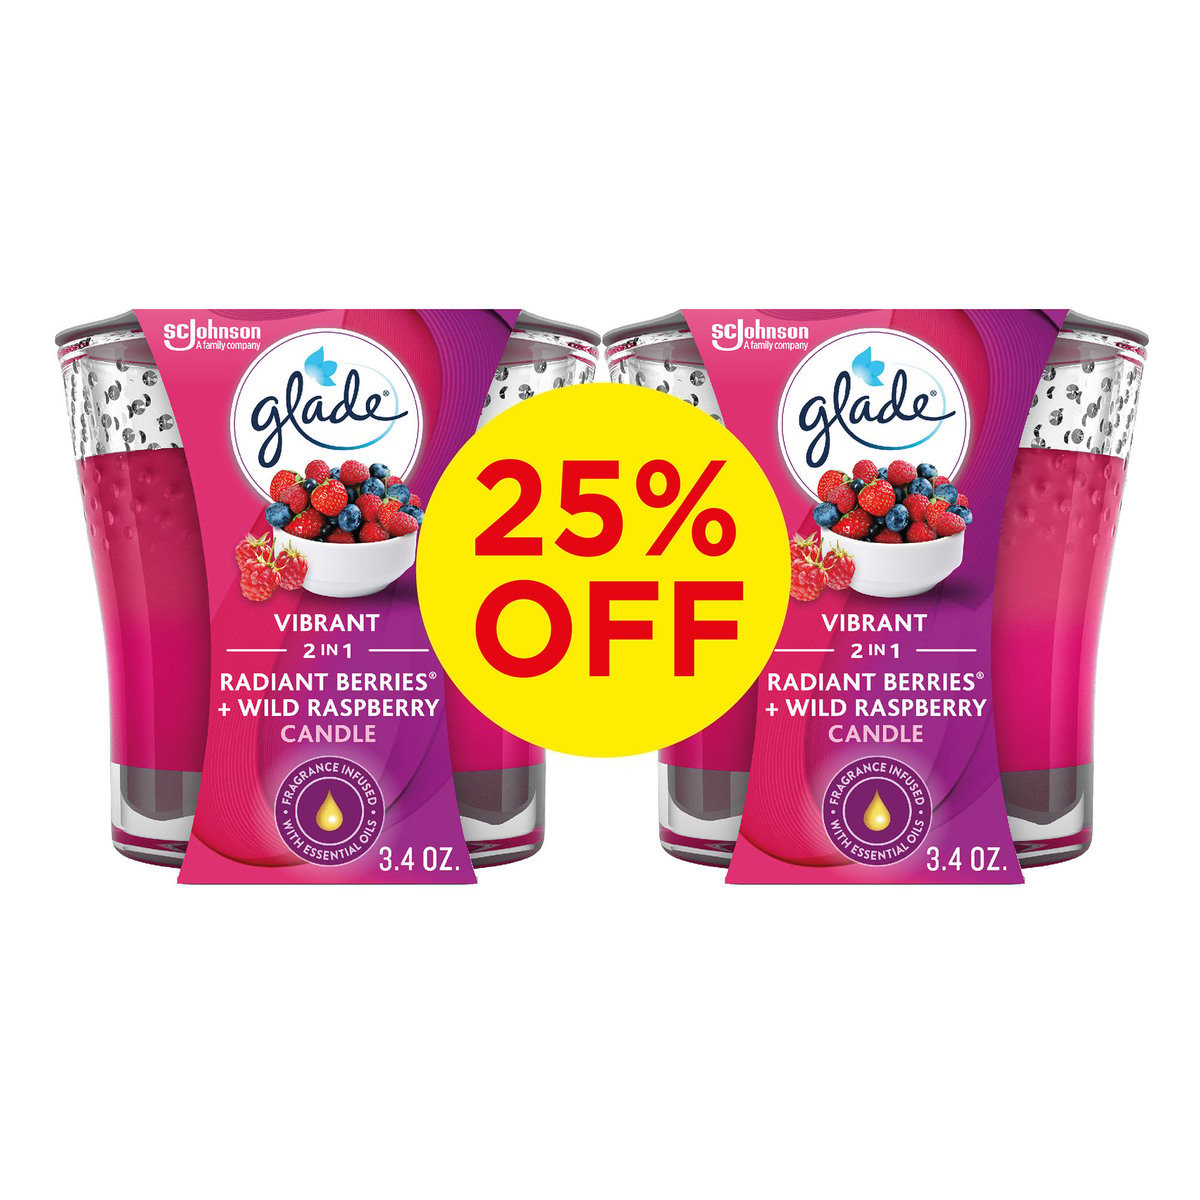 Glade Assorted Candle Value Pack 2 x 3.4 oz